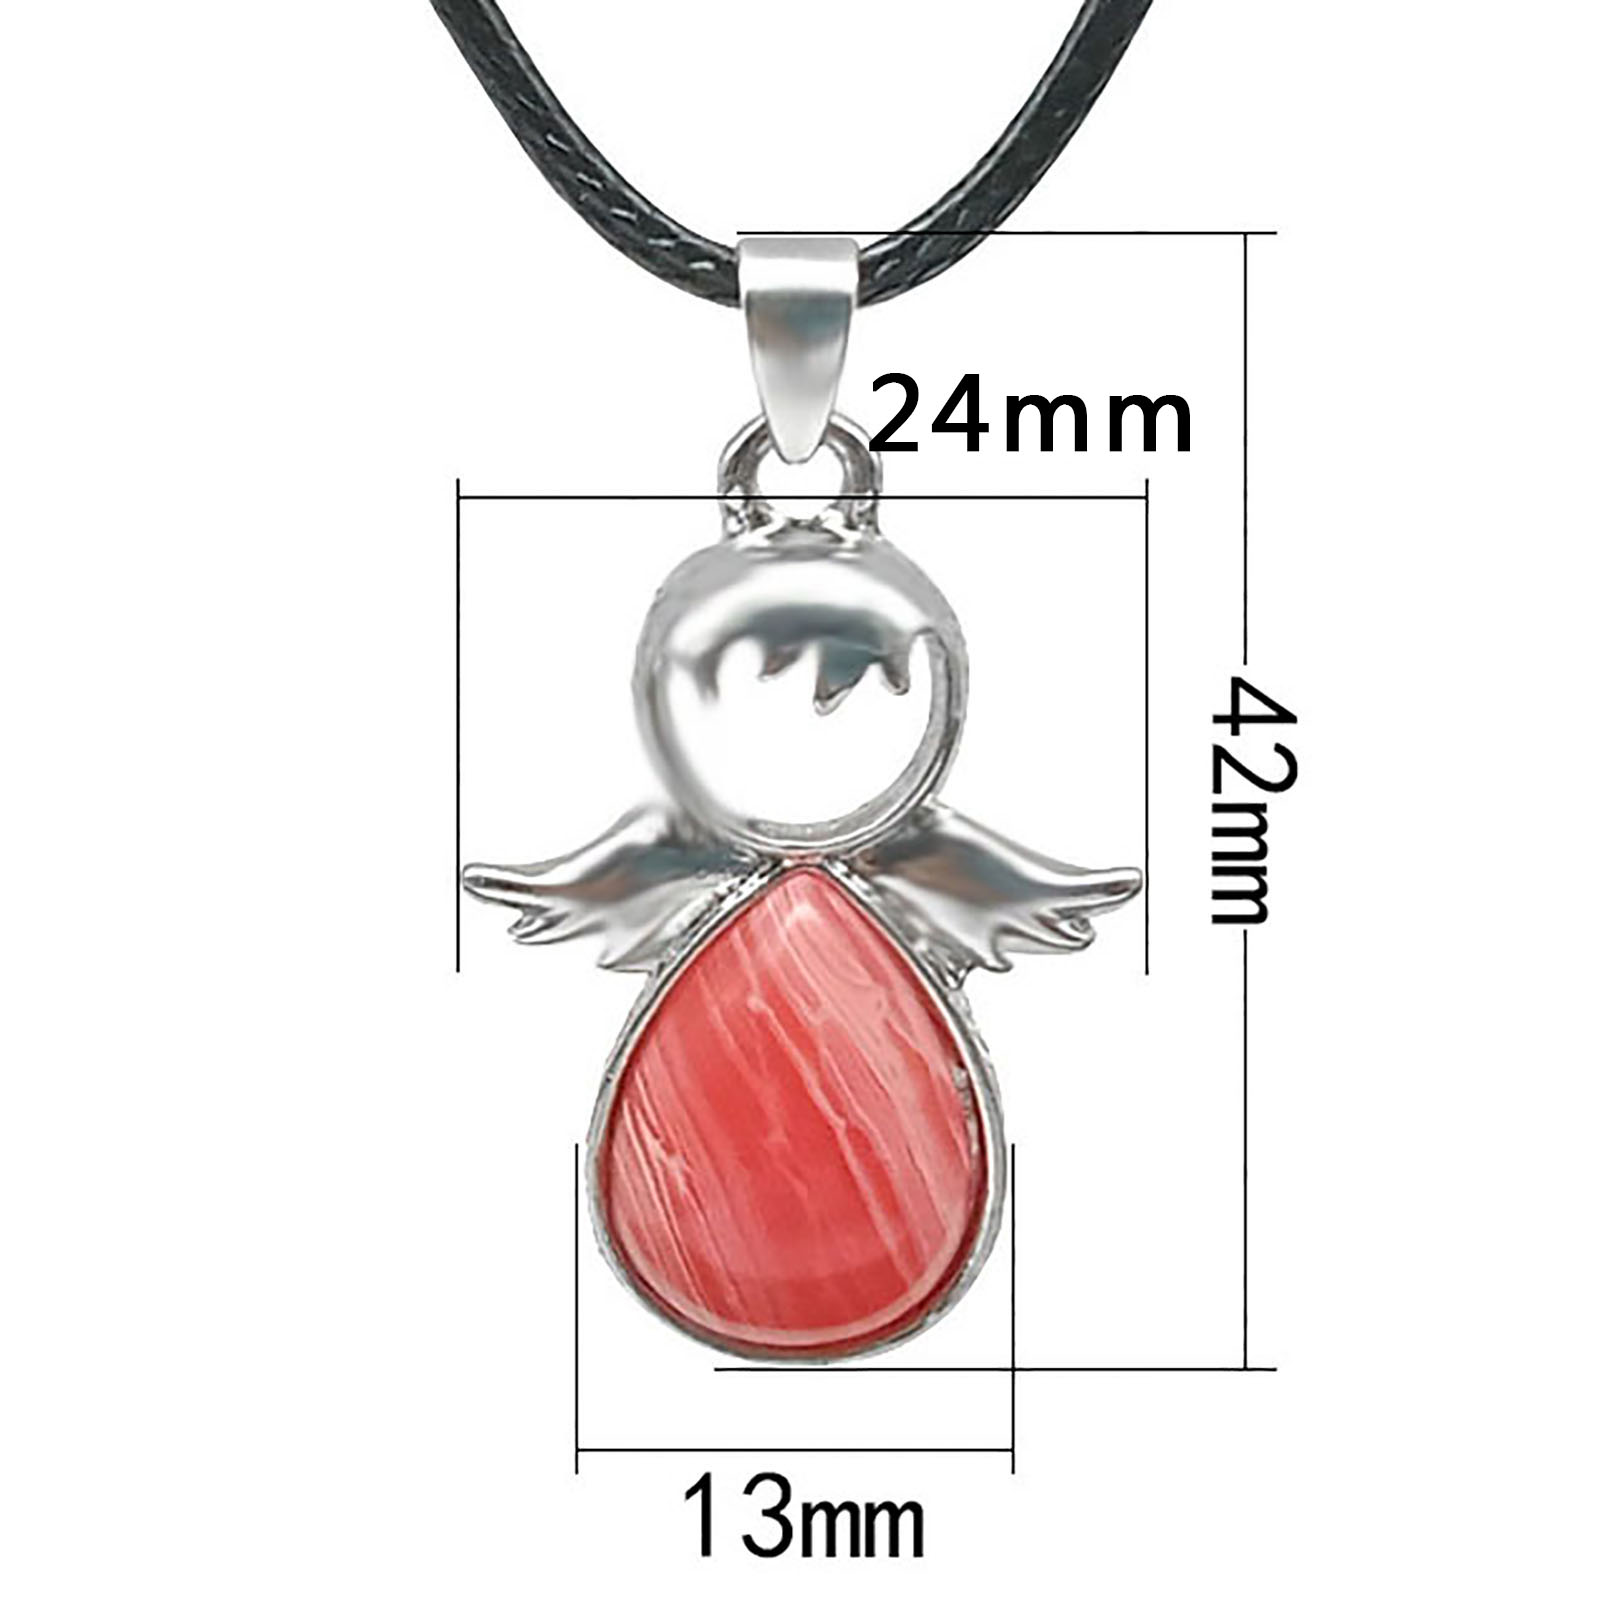 The length of the pendant is about 24mm, the height is about 36mm (excluding the buckle), and the length of the chain is about 50cm